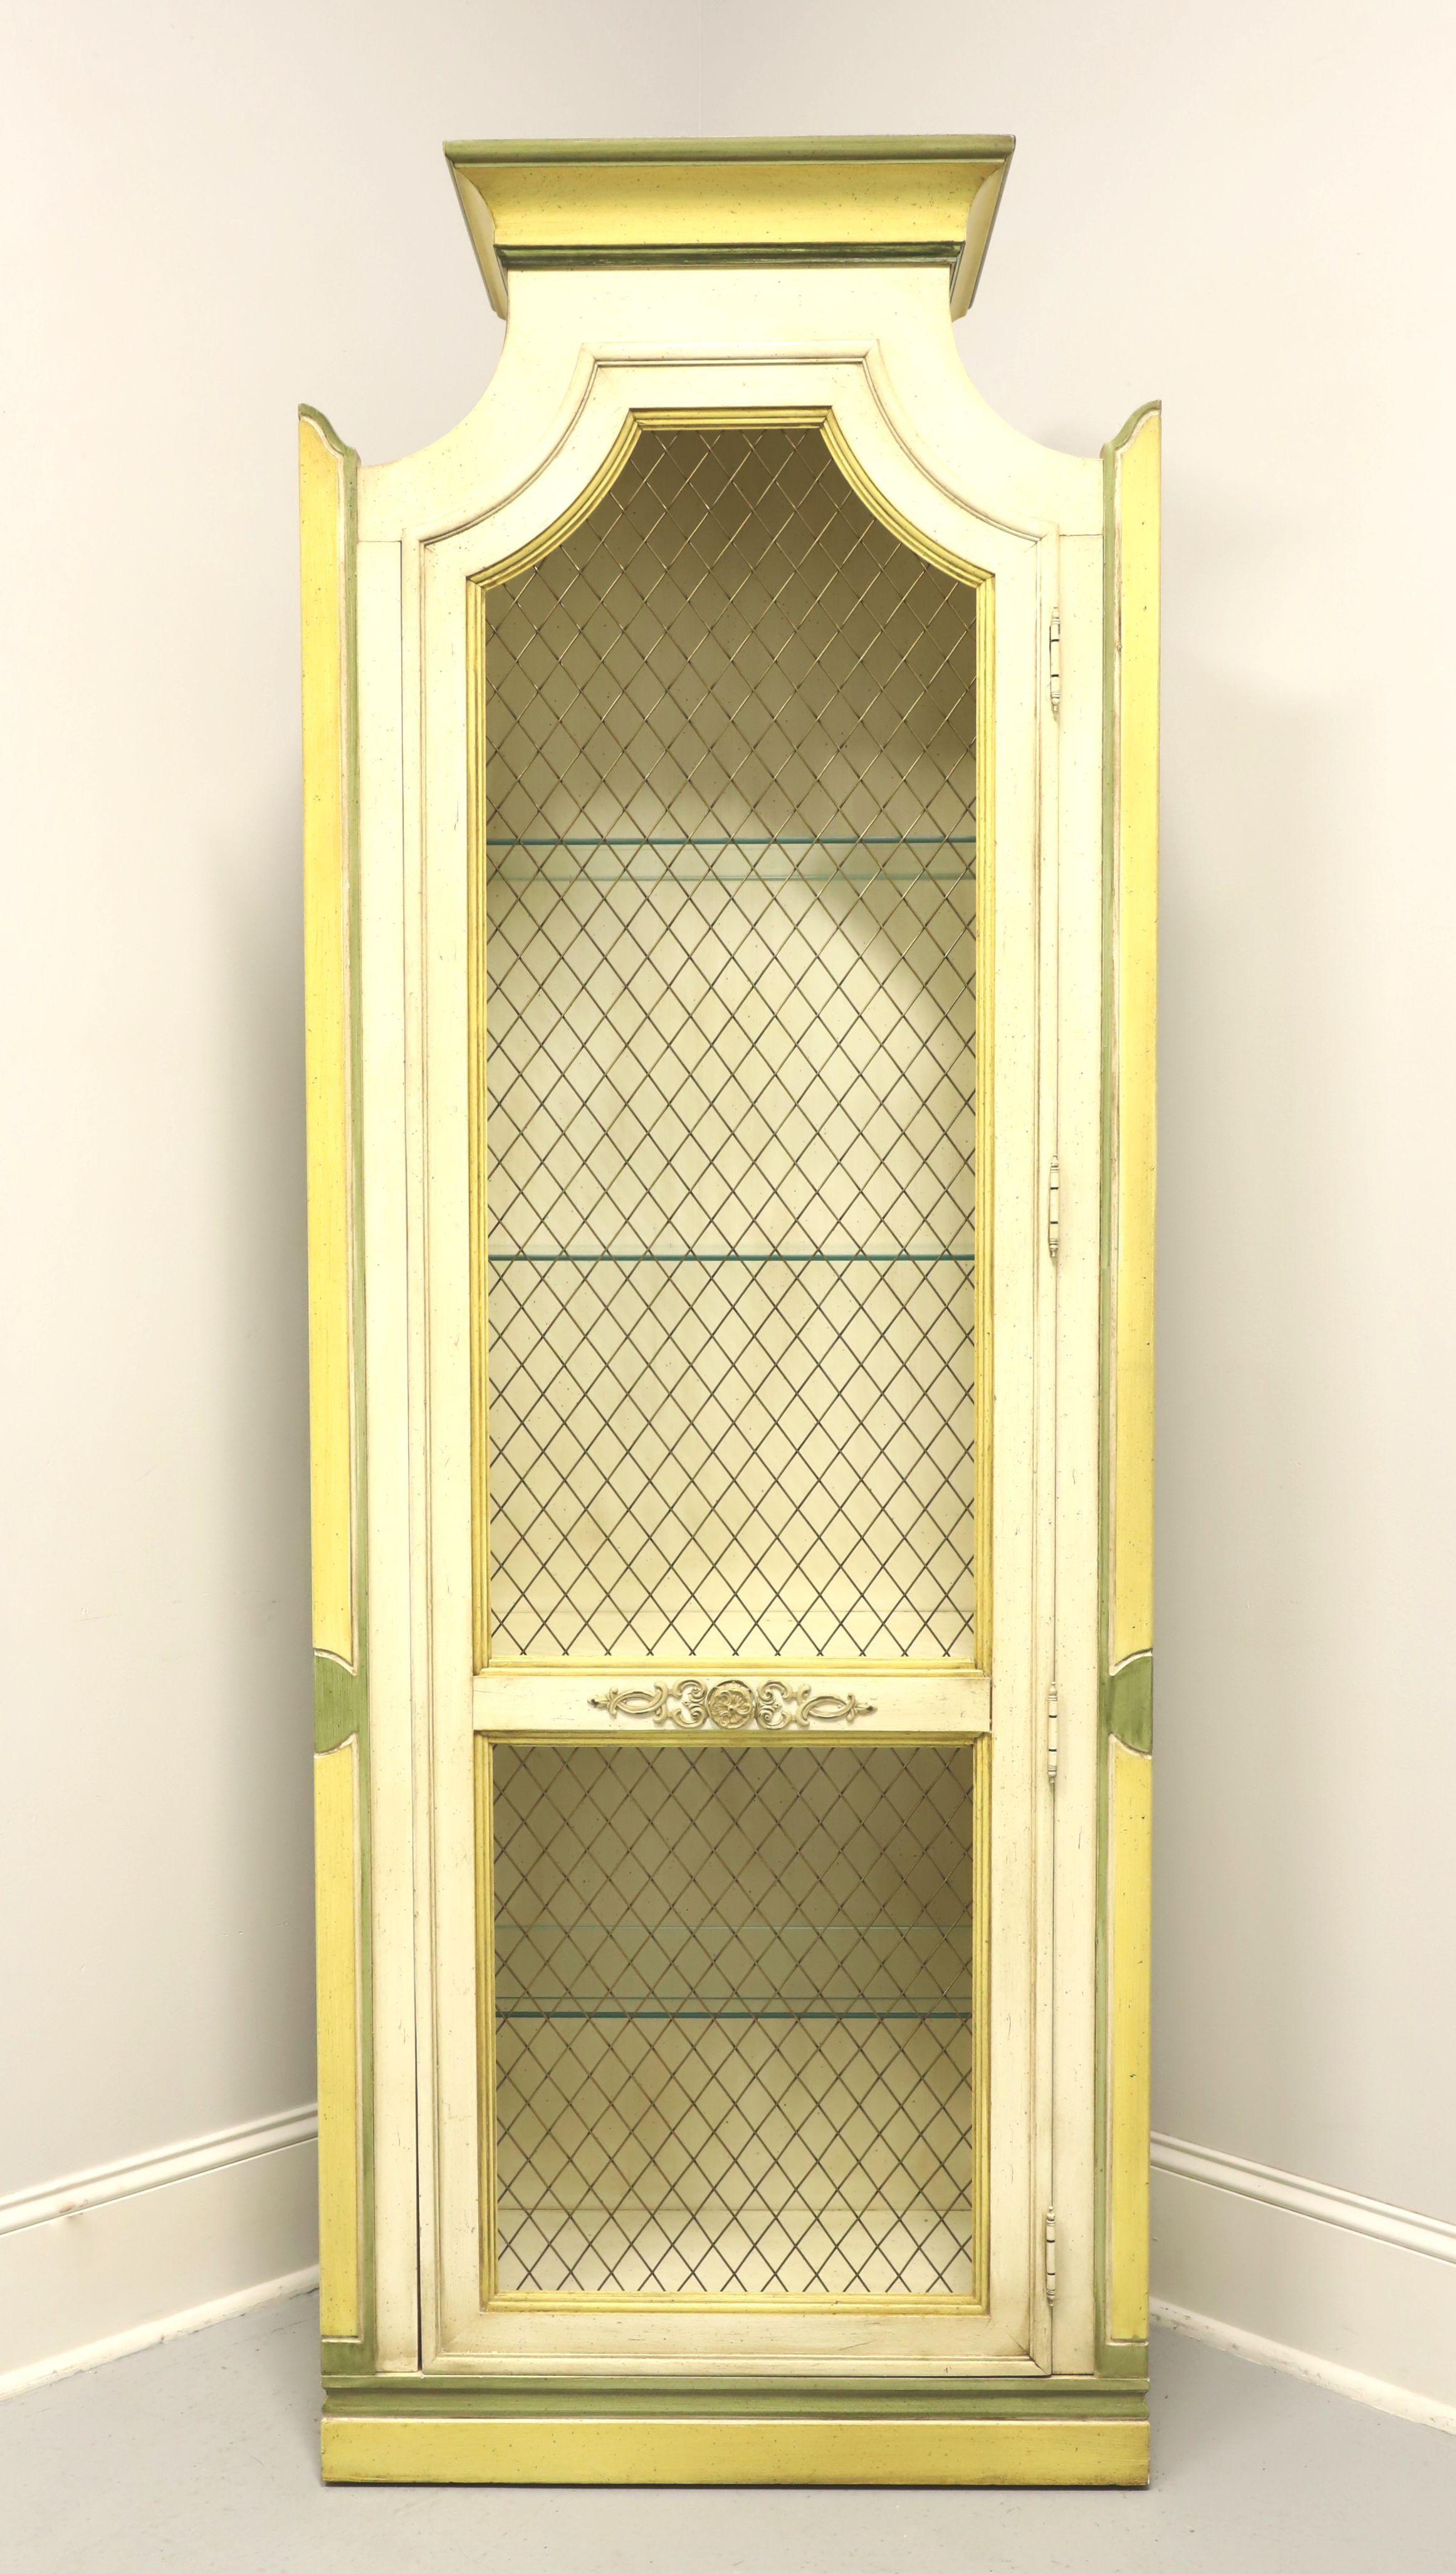 A Neoclassical style curio display cabinet by Thomasville. Solid hardwood painted antique white, yellow & green, pediment crown to top, decorative arched side columns, brass mesh and brass hardware. Features a single brass mesh covered door with